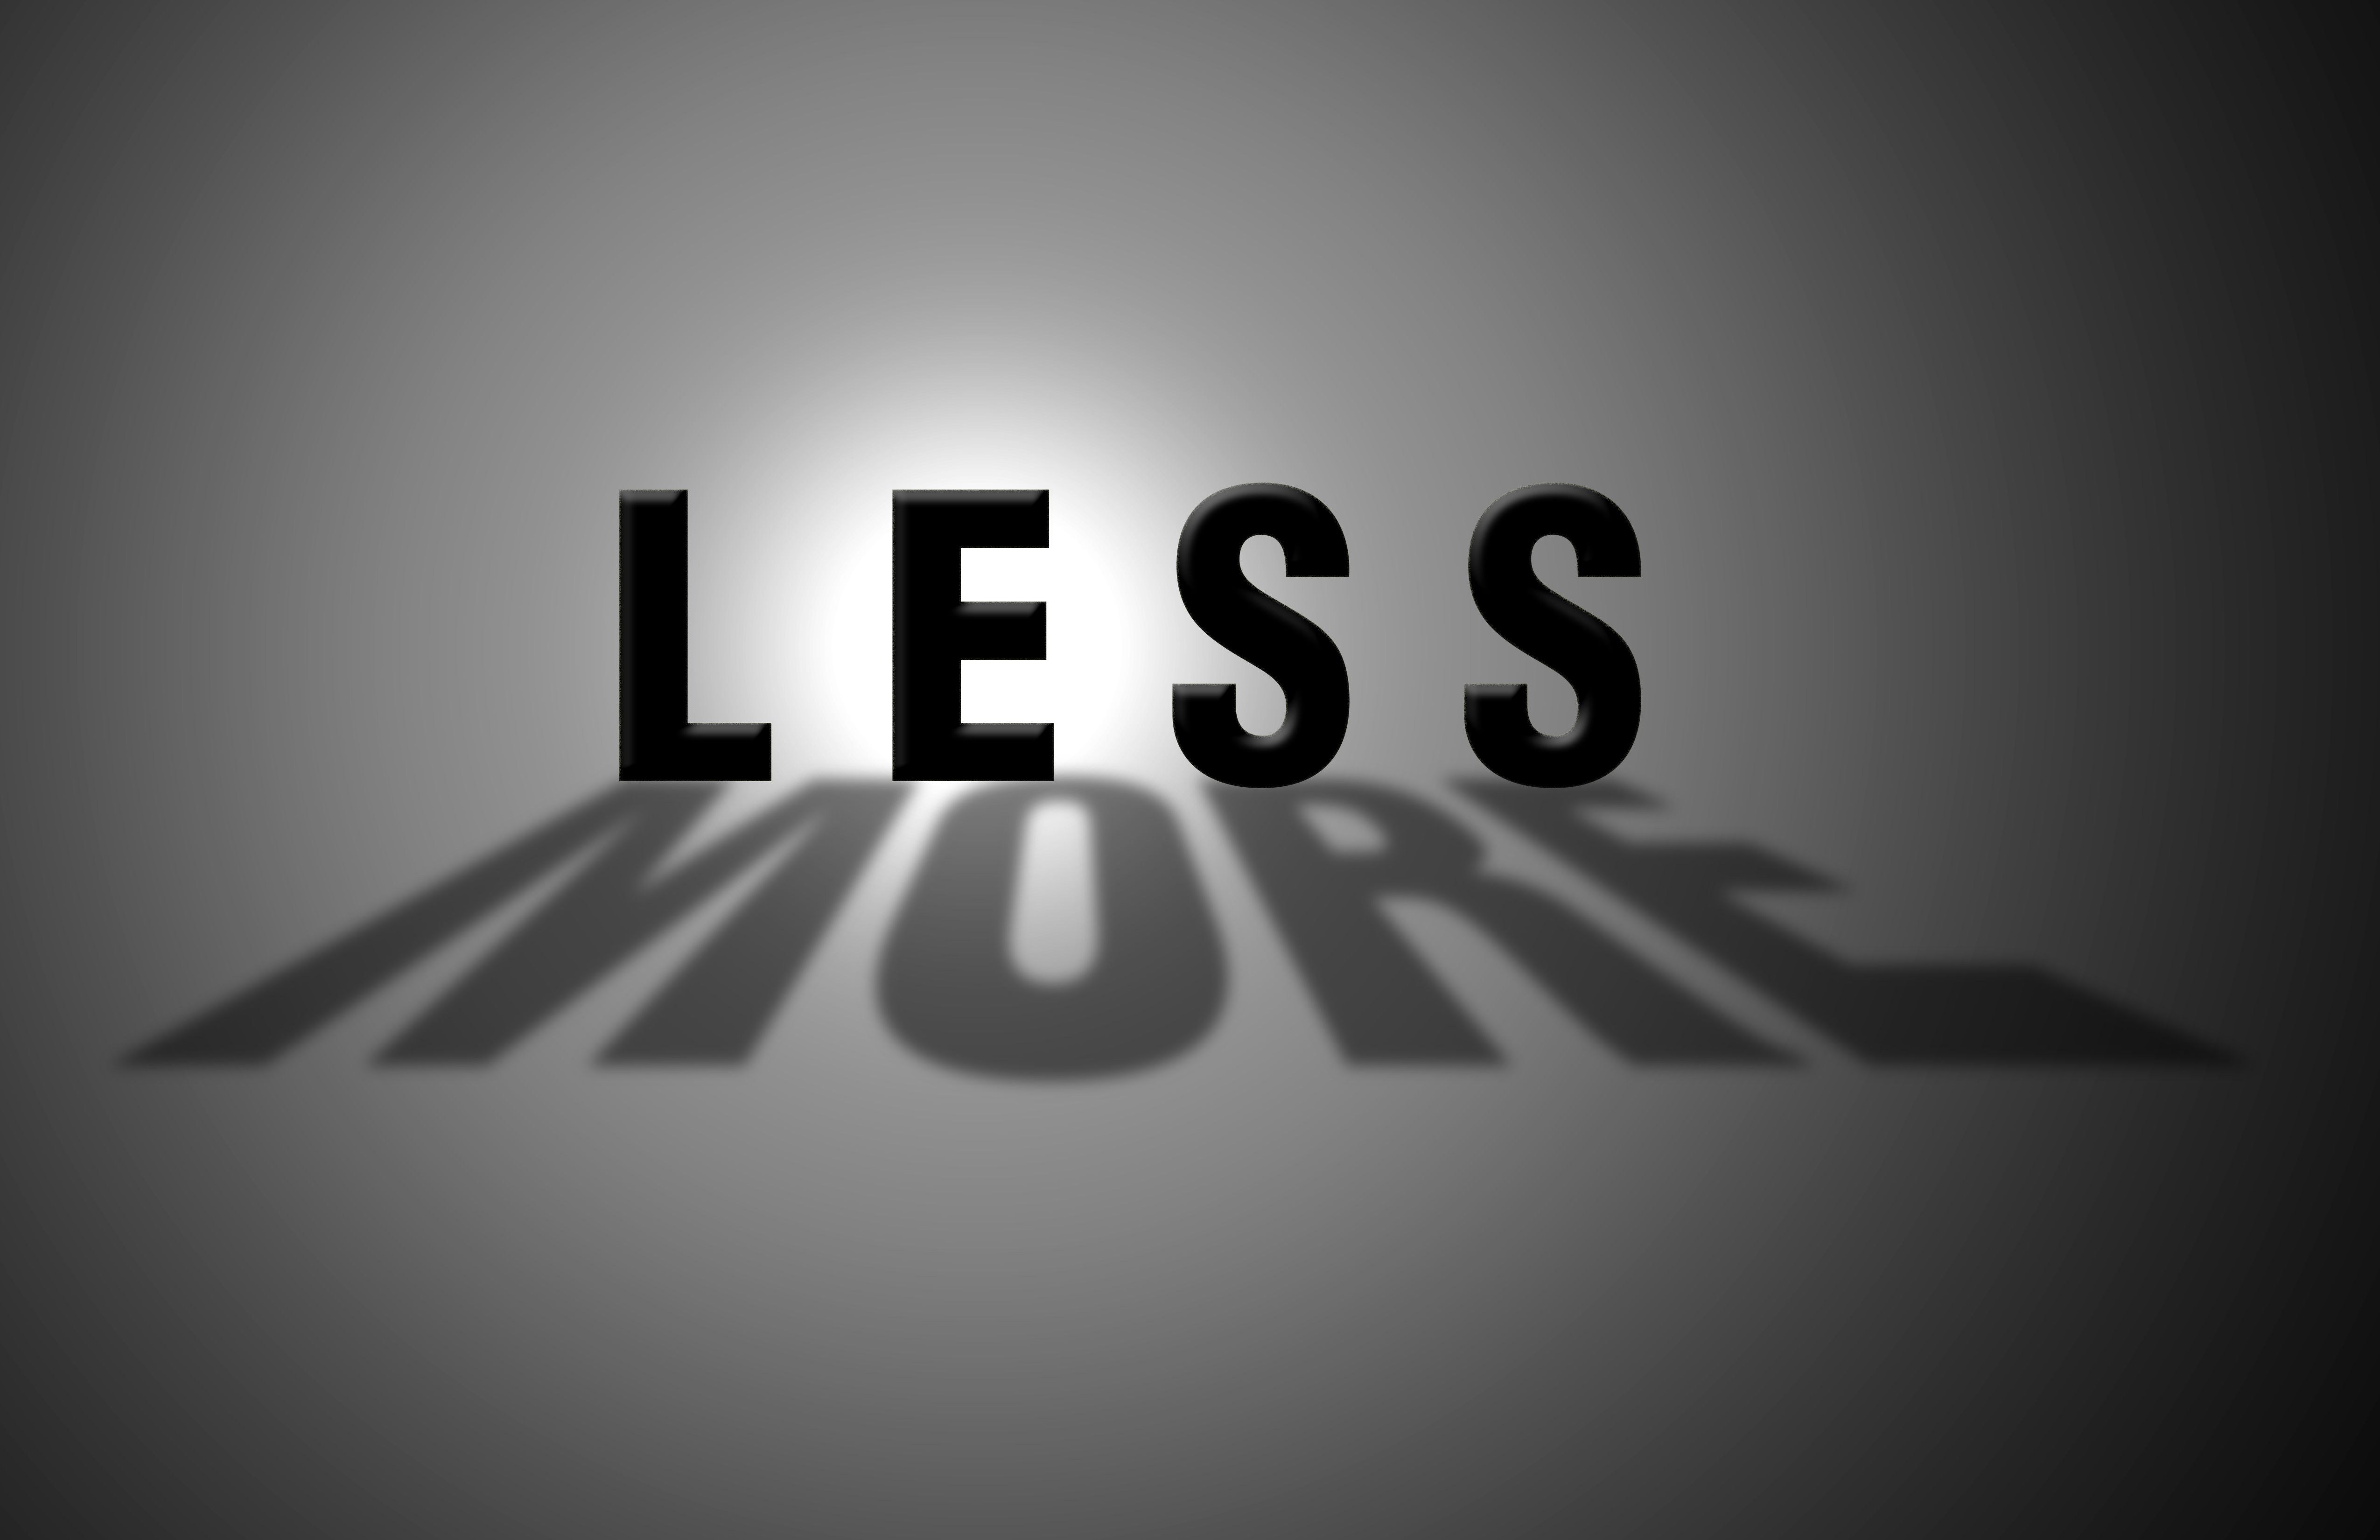 ZLESS IS MORE